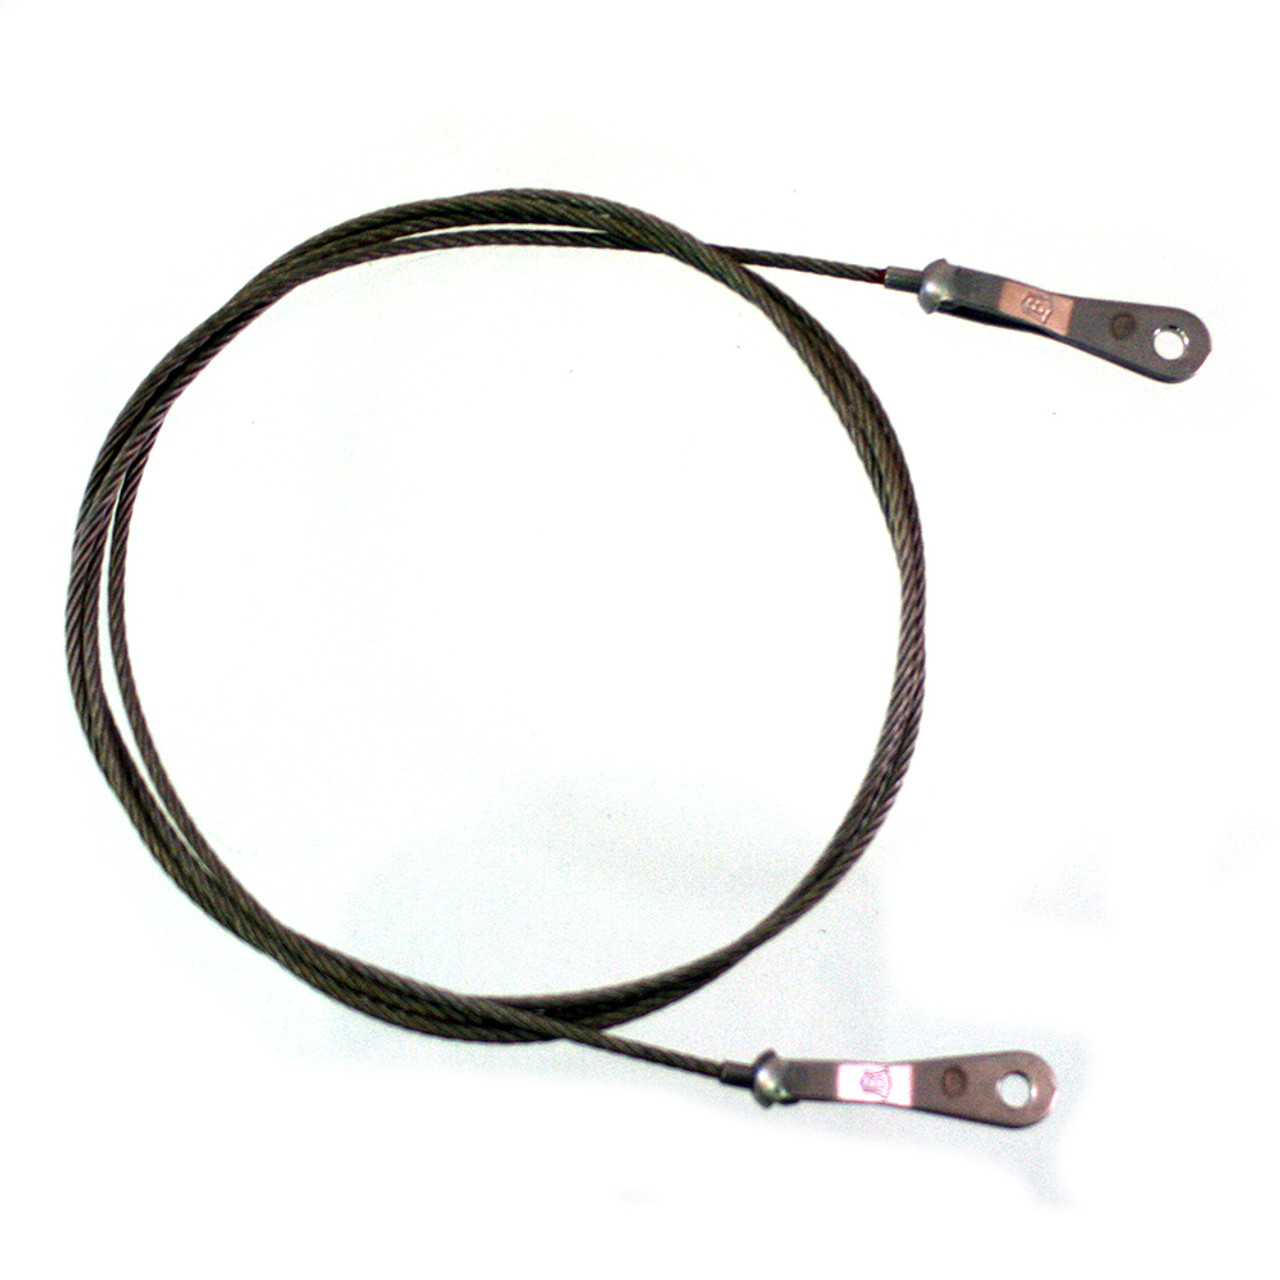 U0510105-196   UNIVAIR TAILWHEEL STEERING CABLE - FITS CESSNA